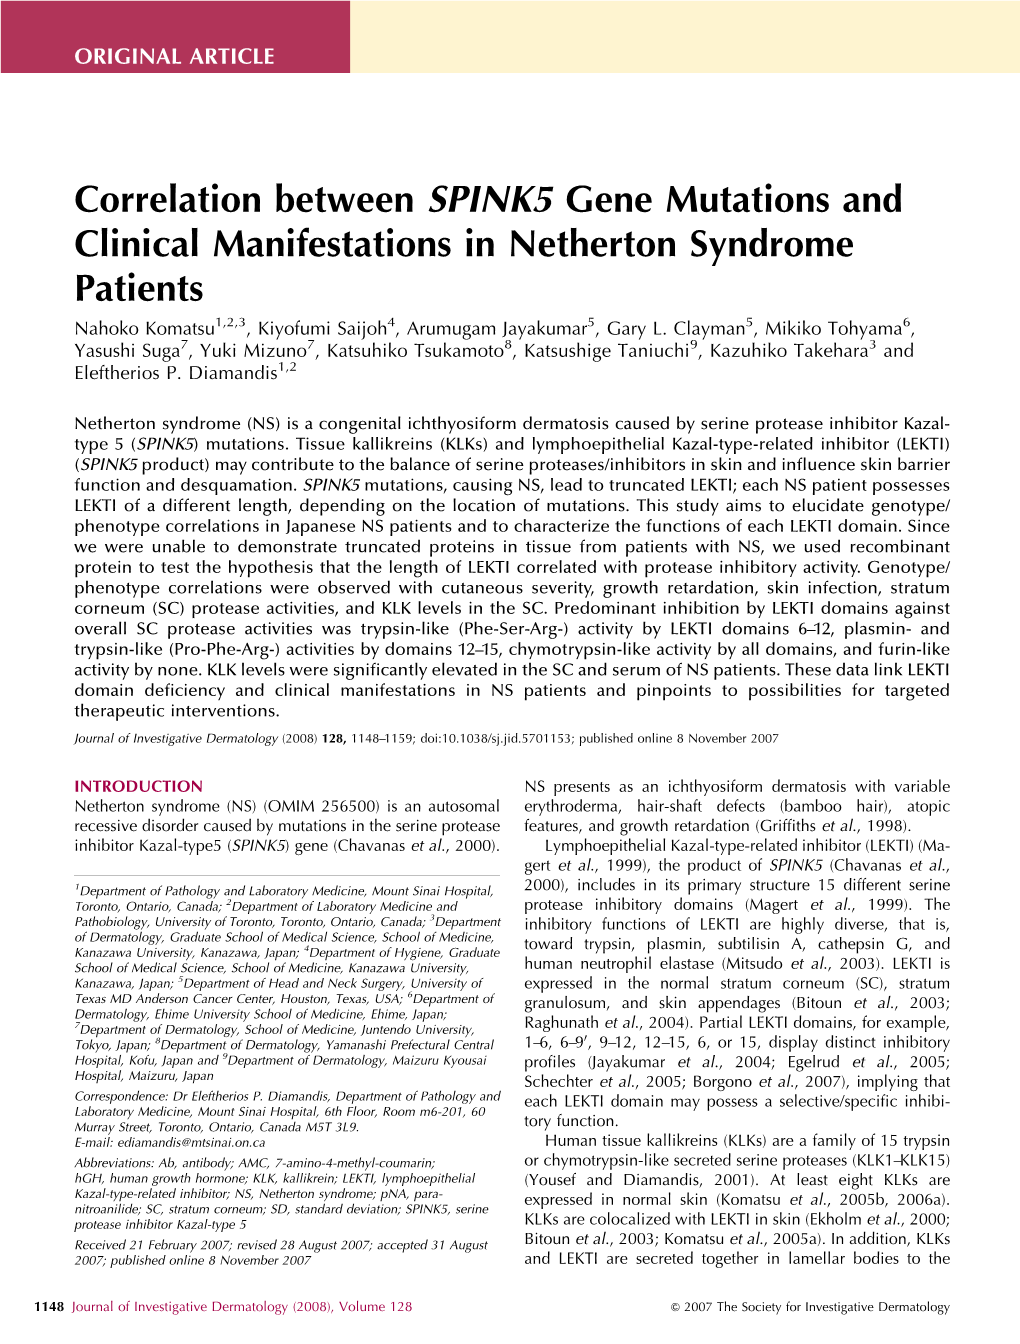 Correlation Between SPINK5 Gene Mutations and Clinical